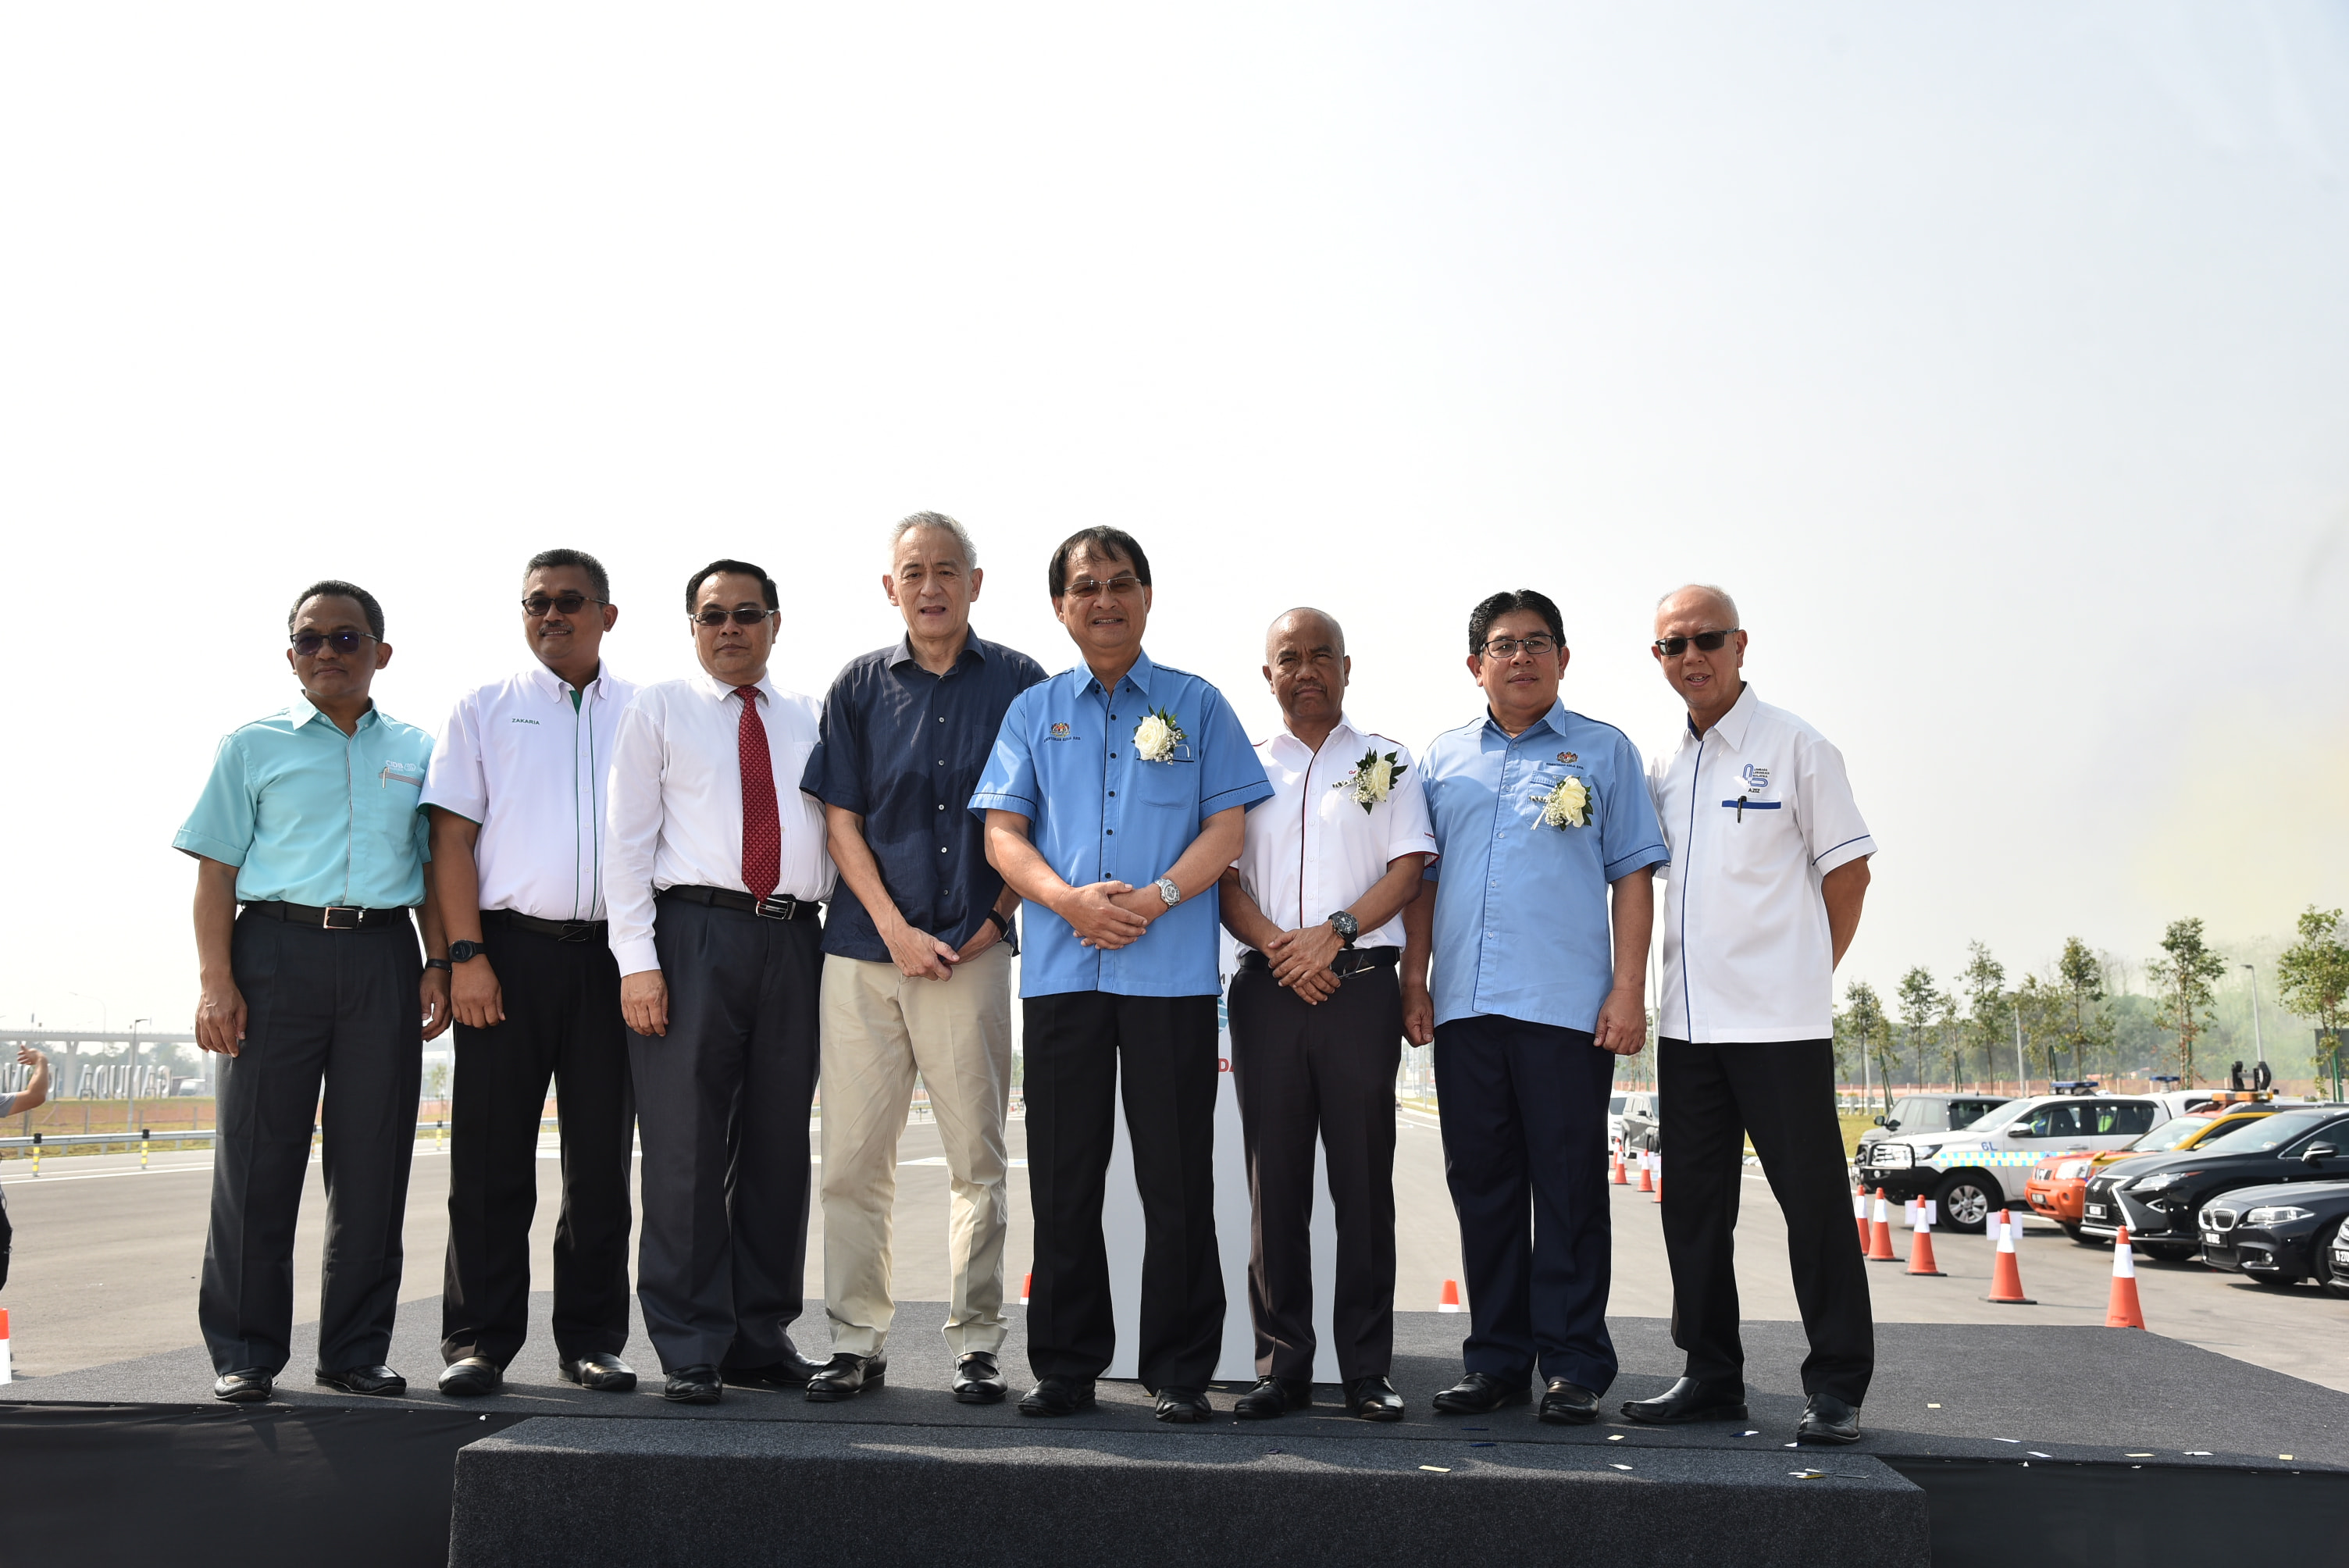 Gamuda Bhd Group Director, Executive Director and other officials.